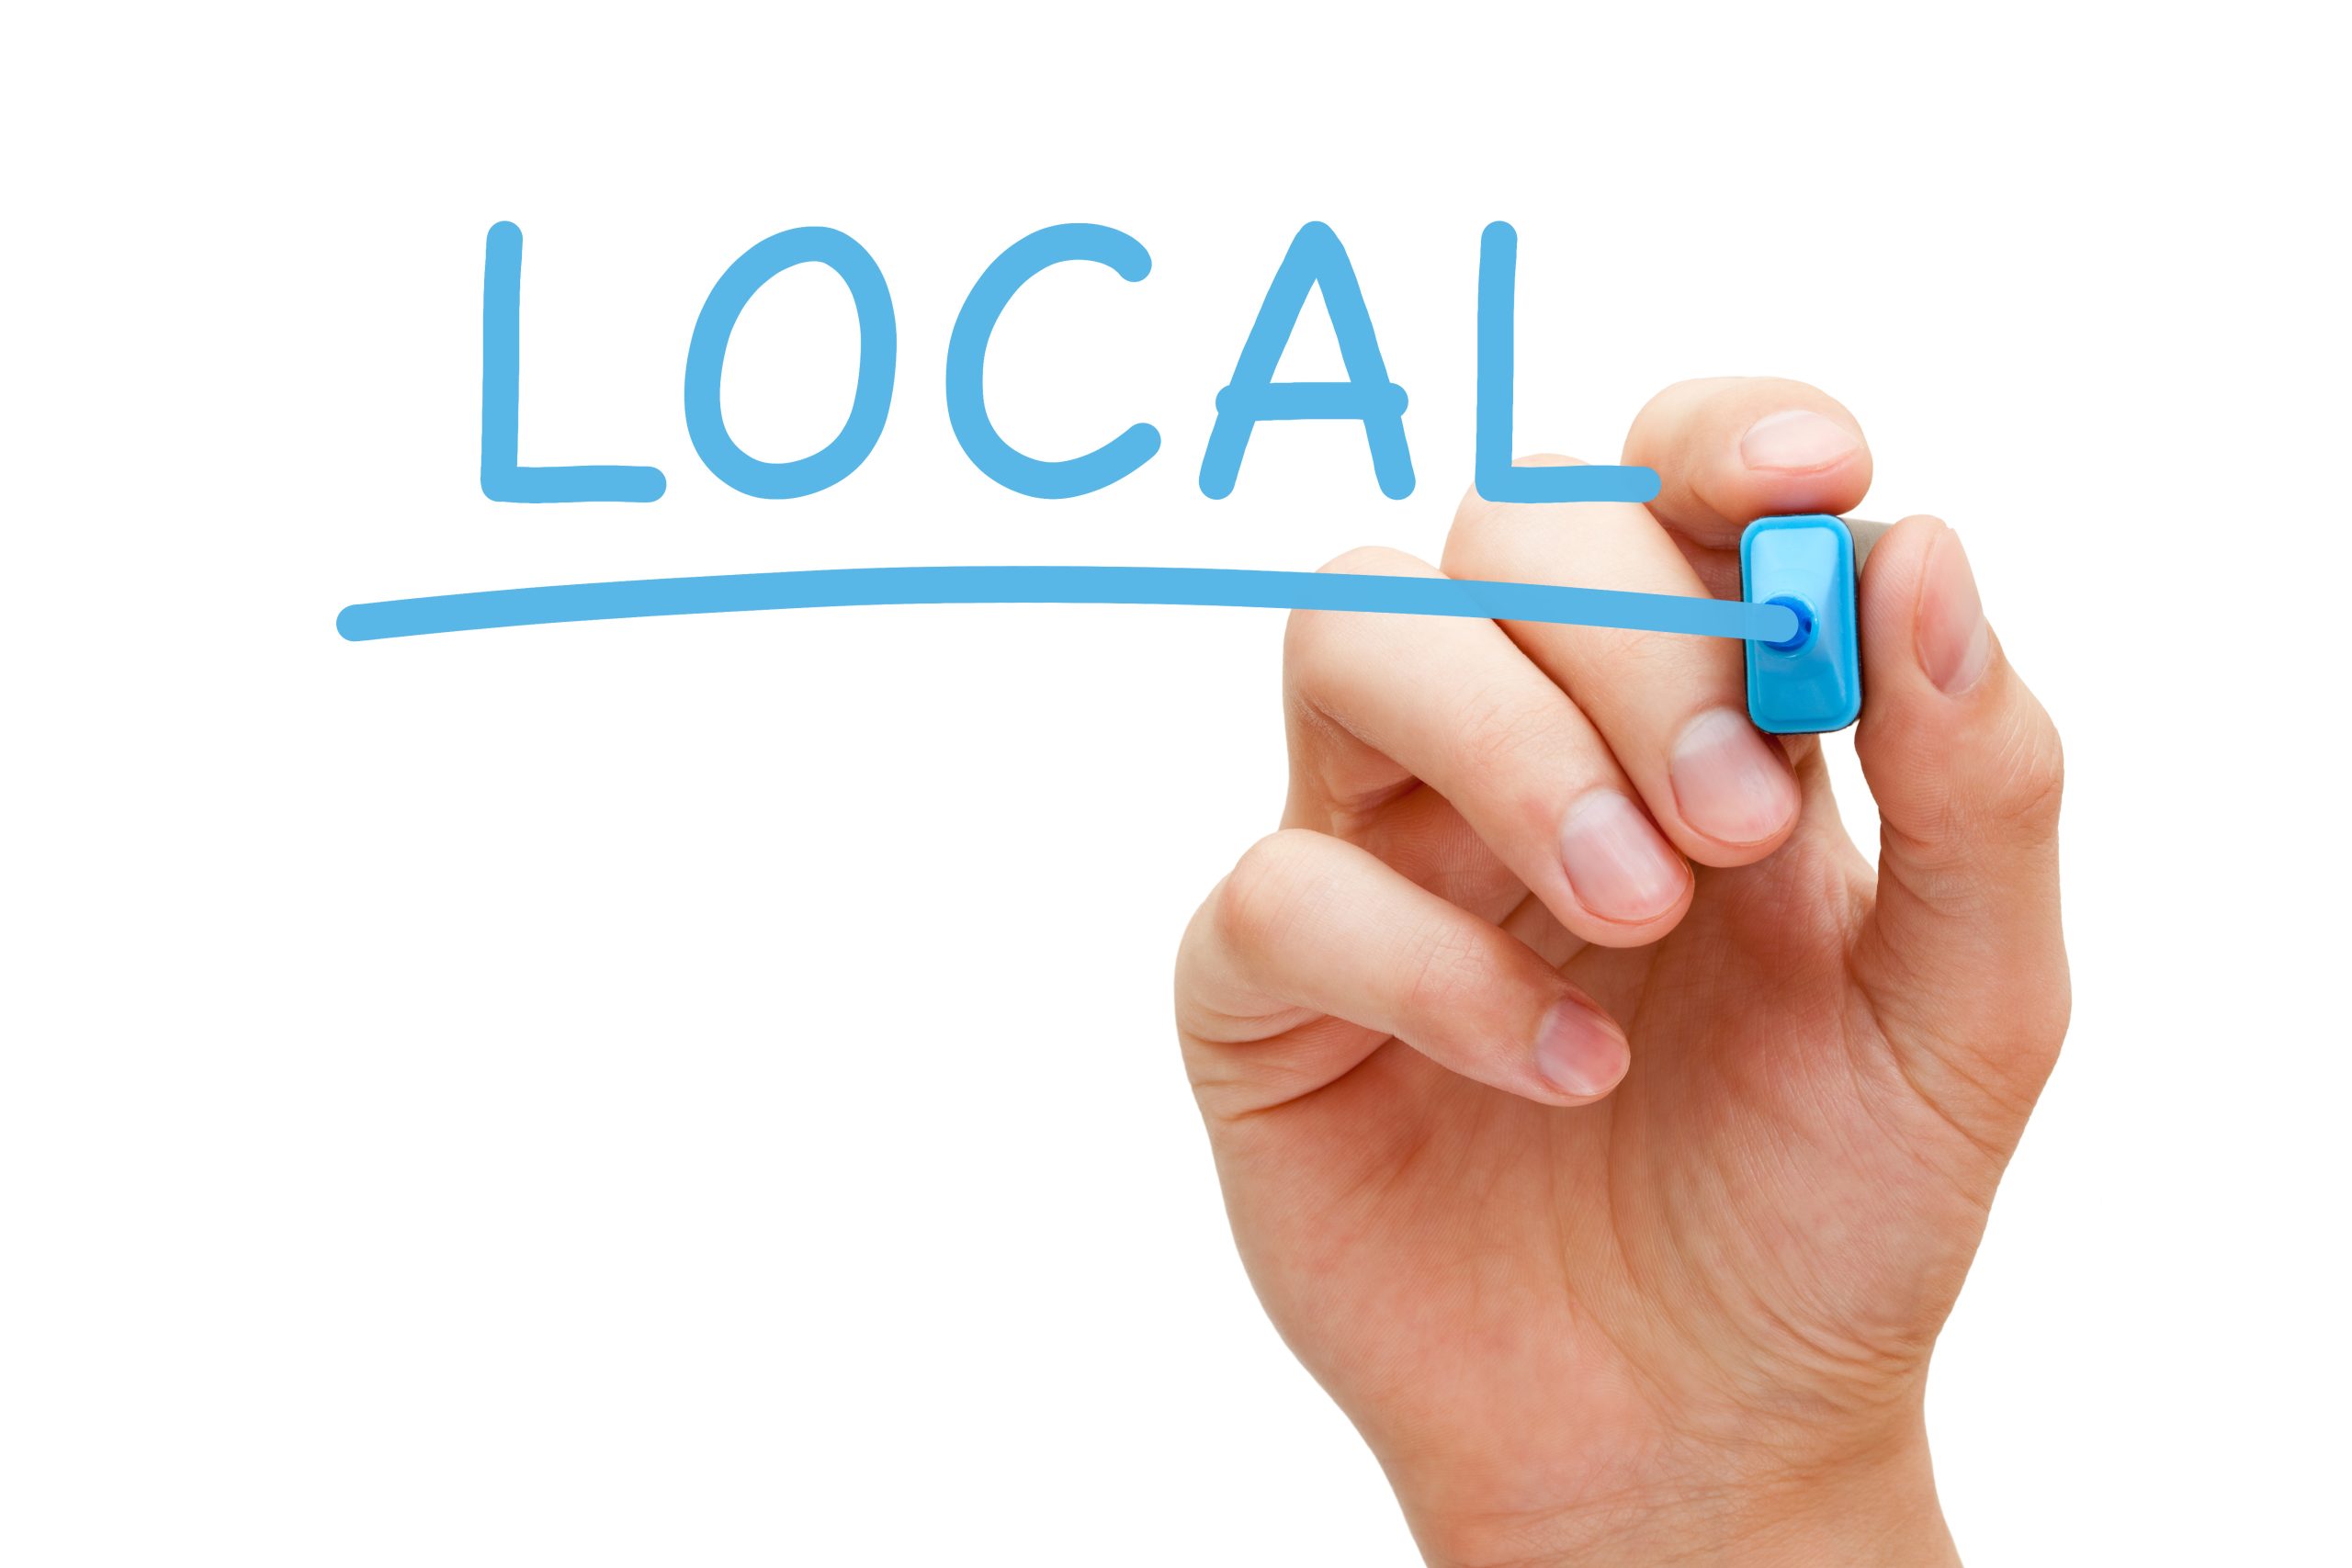 Market Your Business Locally